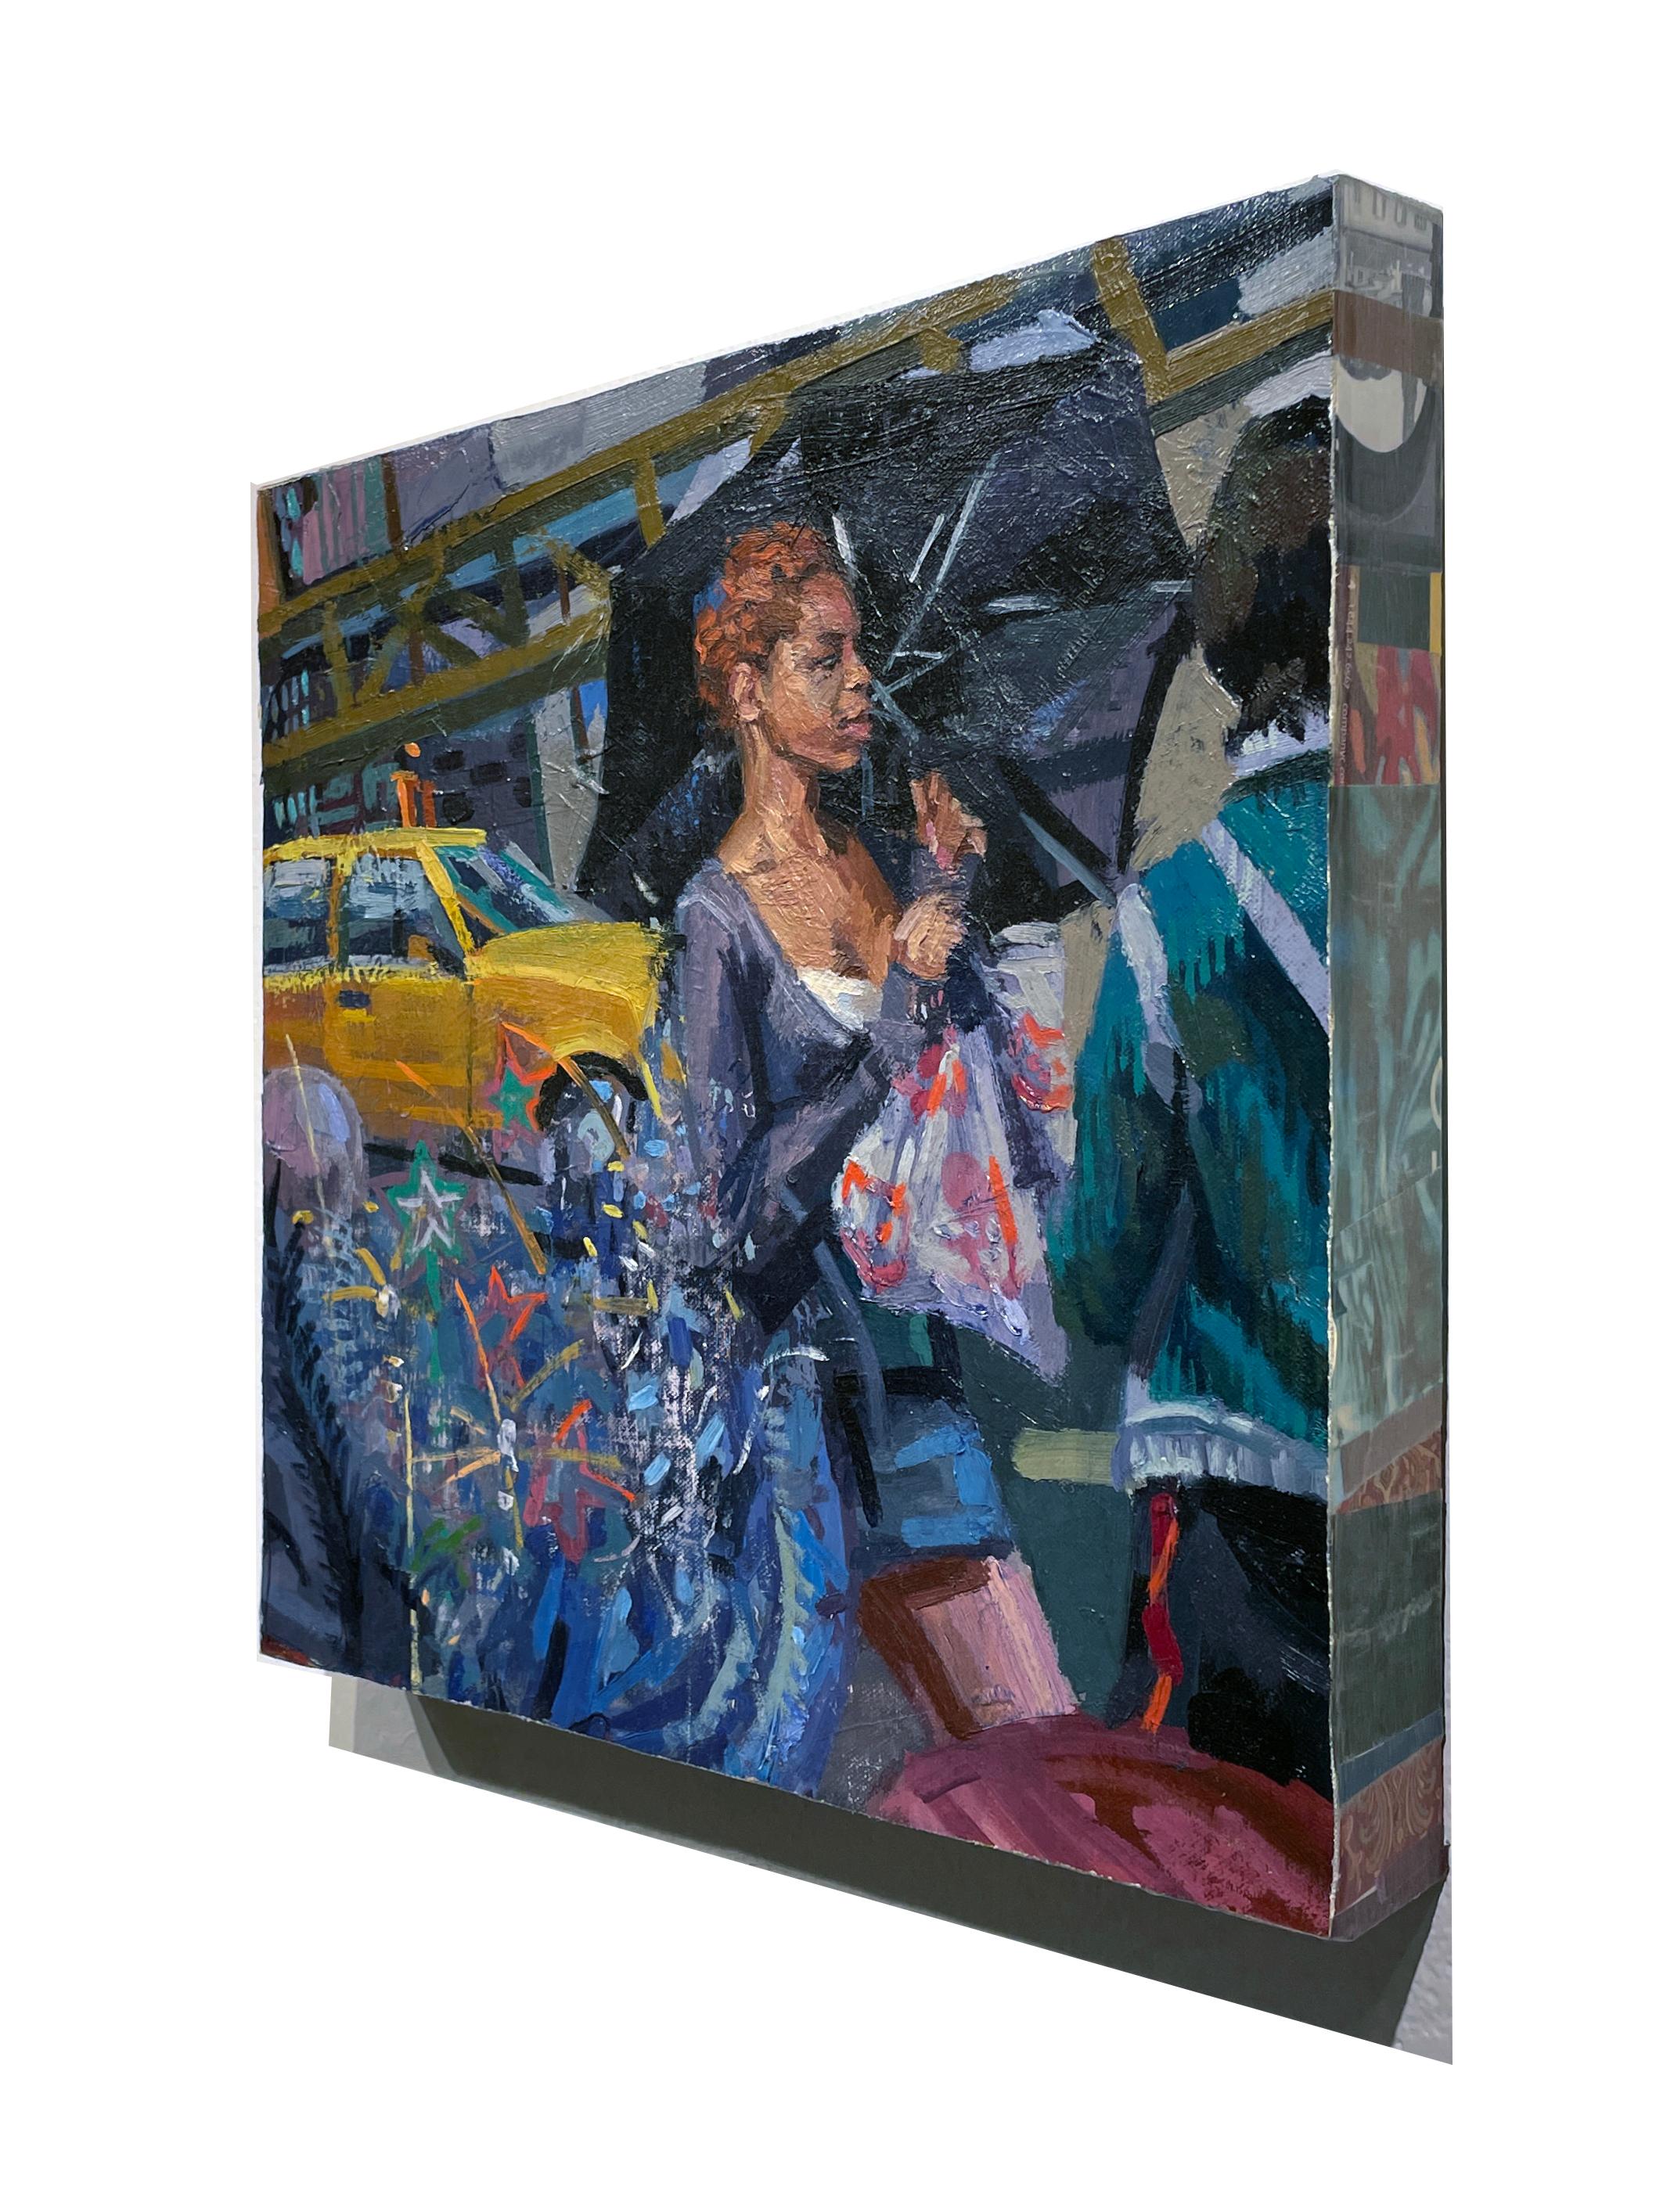 This colorful scene depicts a woman with an umbrella in the midst of a chaotic urban setting.  The foreground is abstracted to include colorful objects blurring the scene.  This mixed media painting has ephemeral pieces covering the edges so there